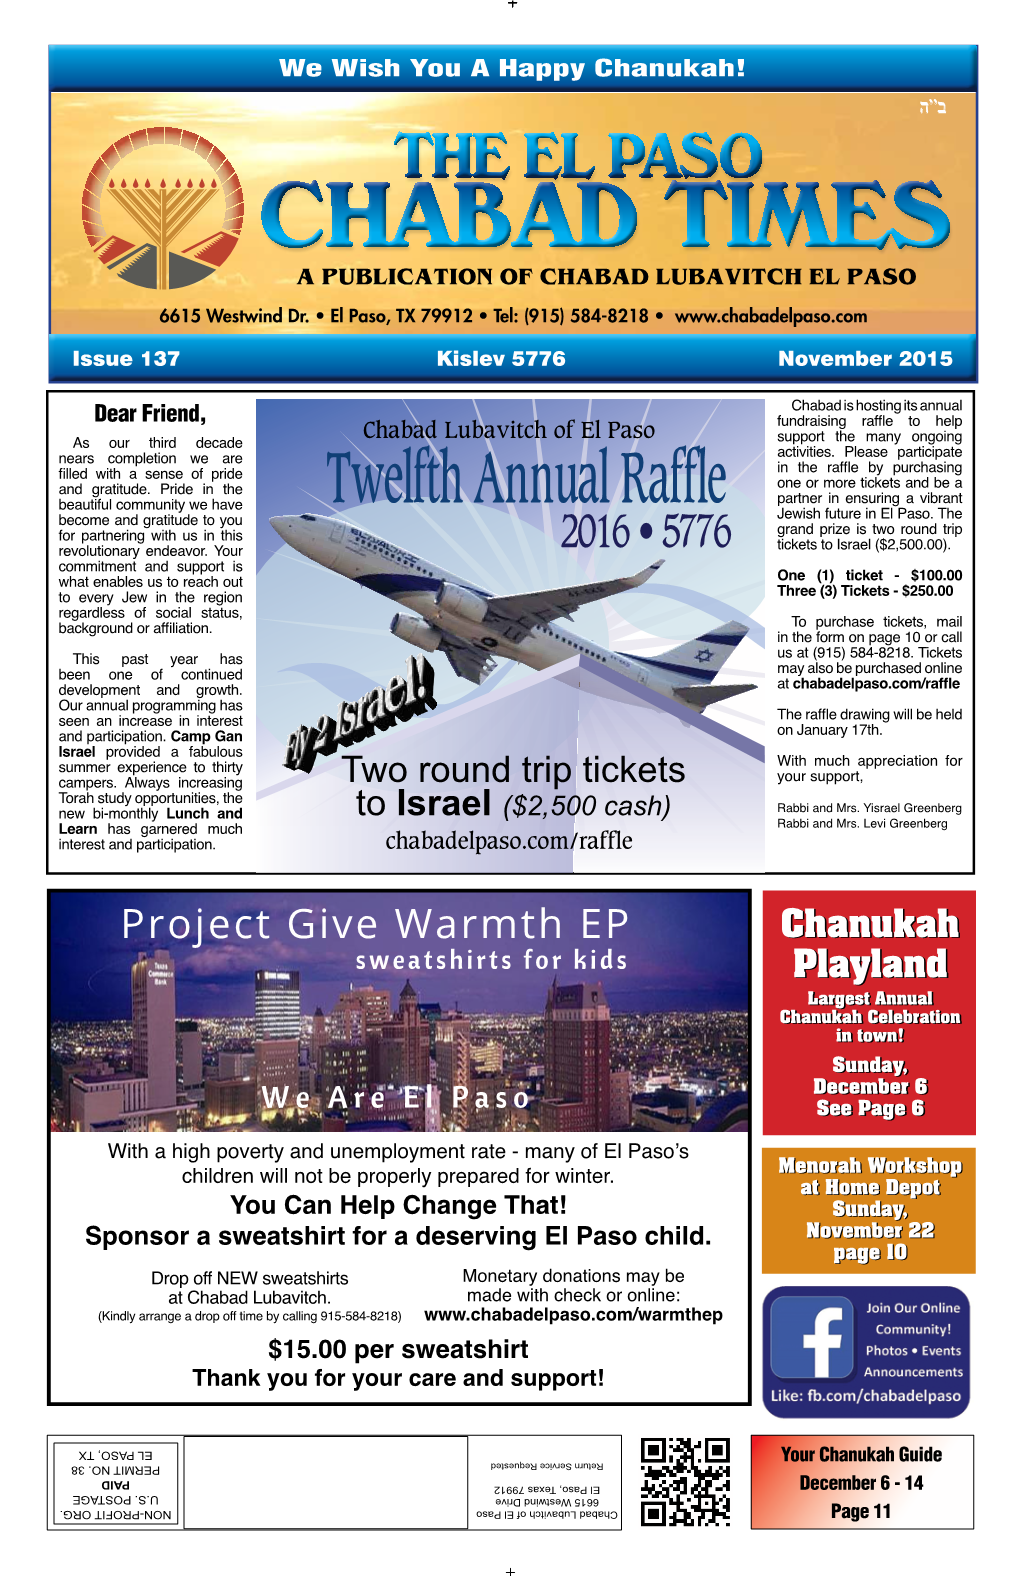 Twelfth Annual Raffle Partner in Ensuring a Vibrant Become and Gratitude to You Jewish Future in El Paso